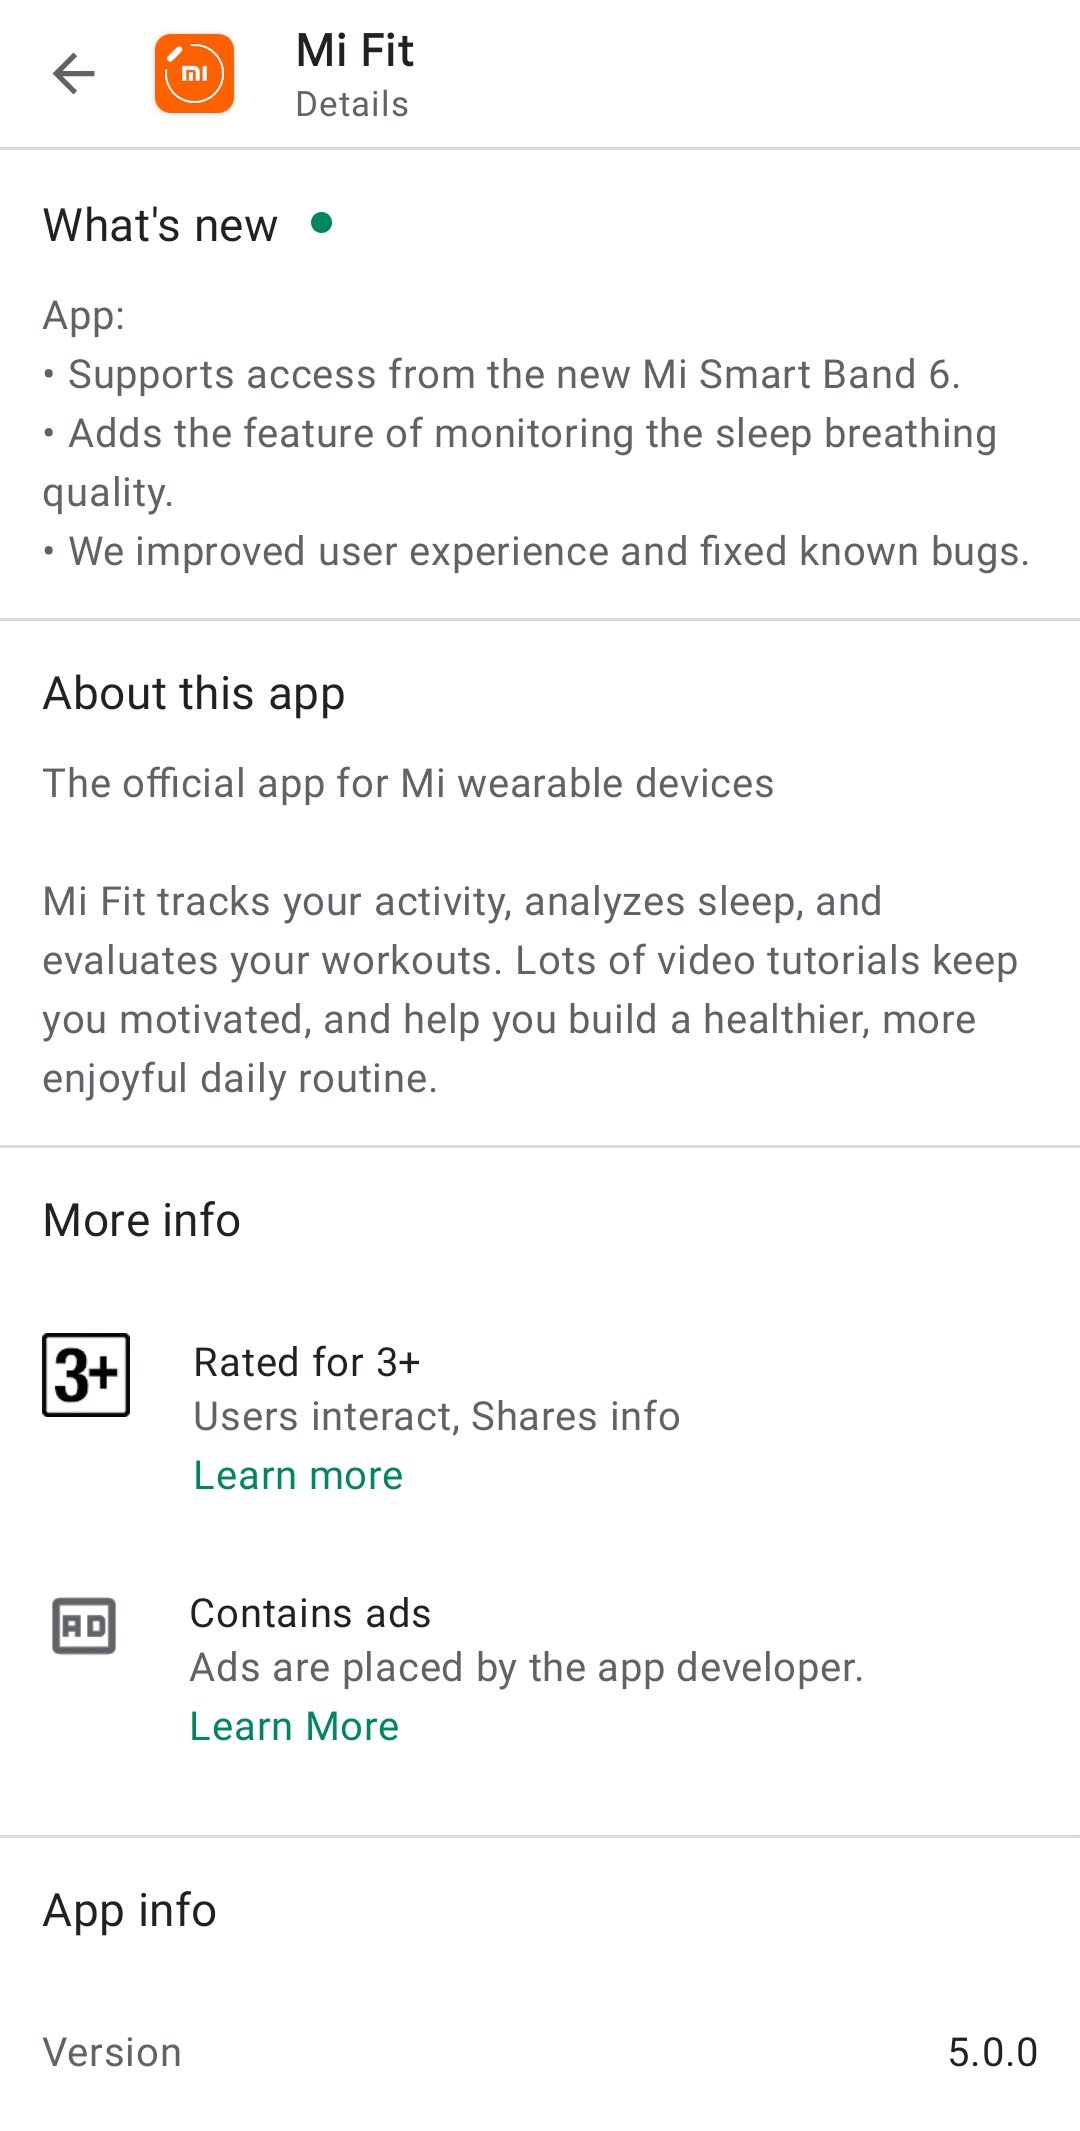 Mi Band 6 gets breathing quality feature via a new update - Gizmochina